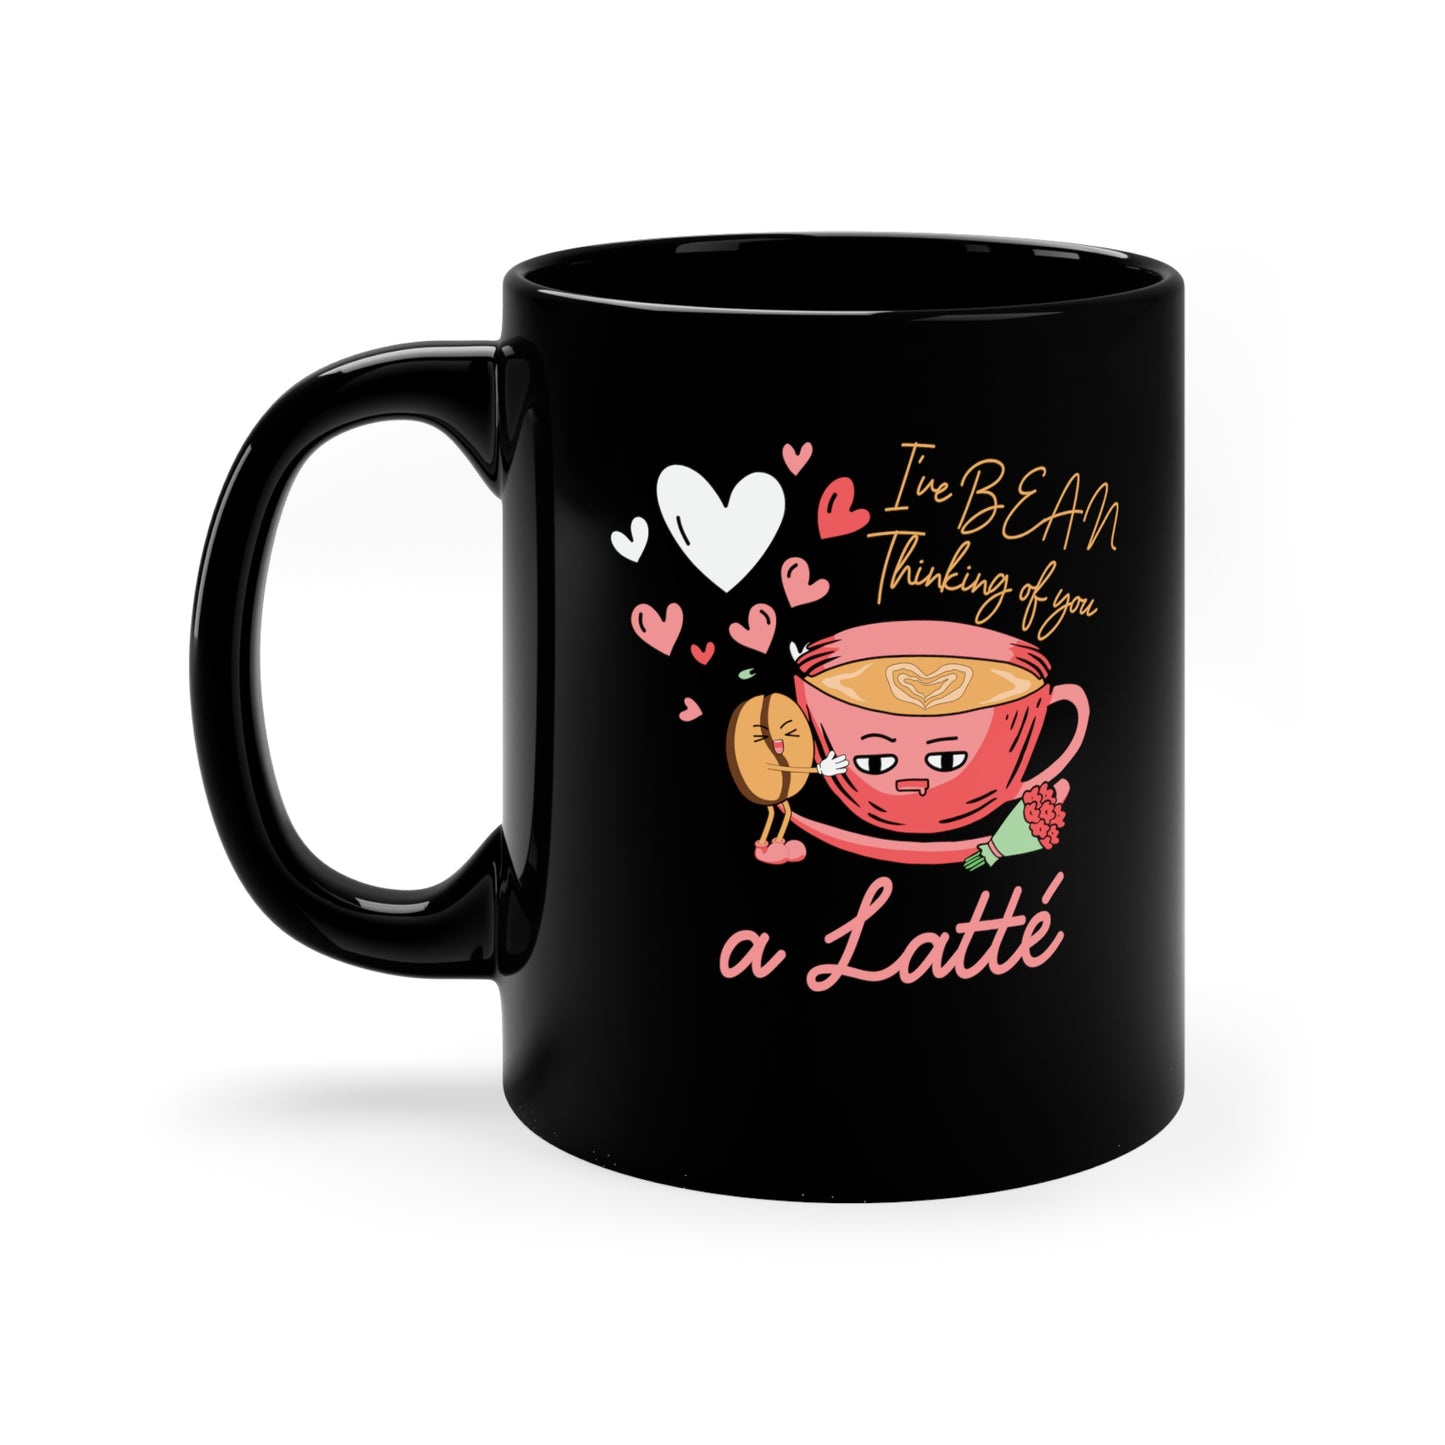 Funny Valentine's Day Mug Gift for Coffee Lovers, Cute Latte Lover Coffee Cup